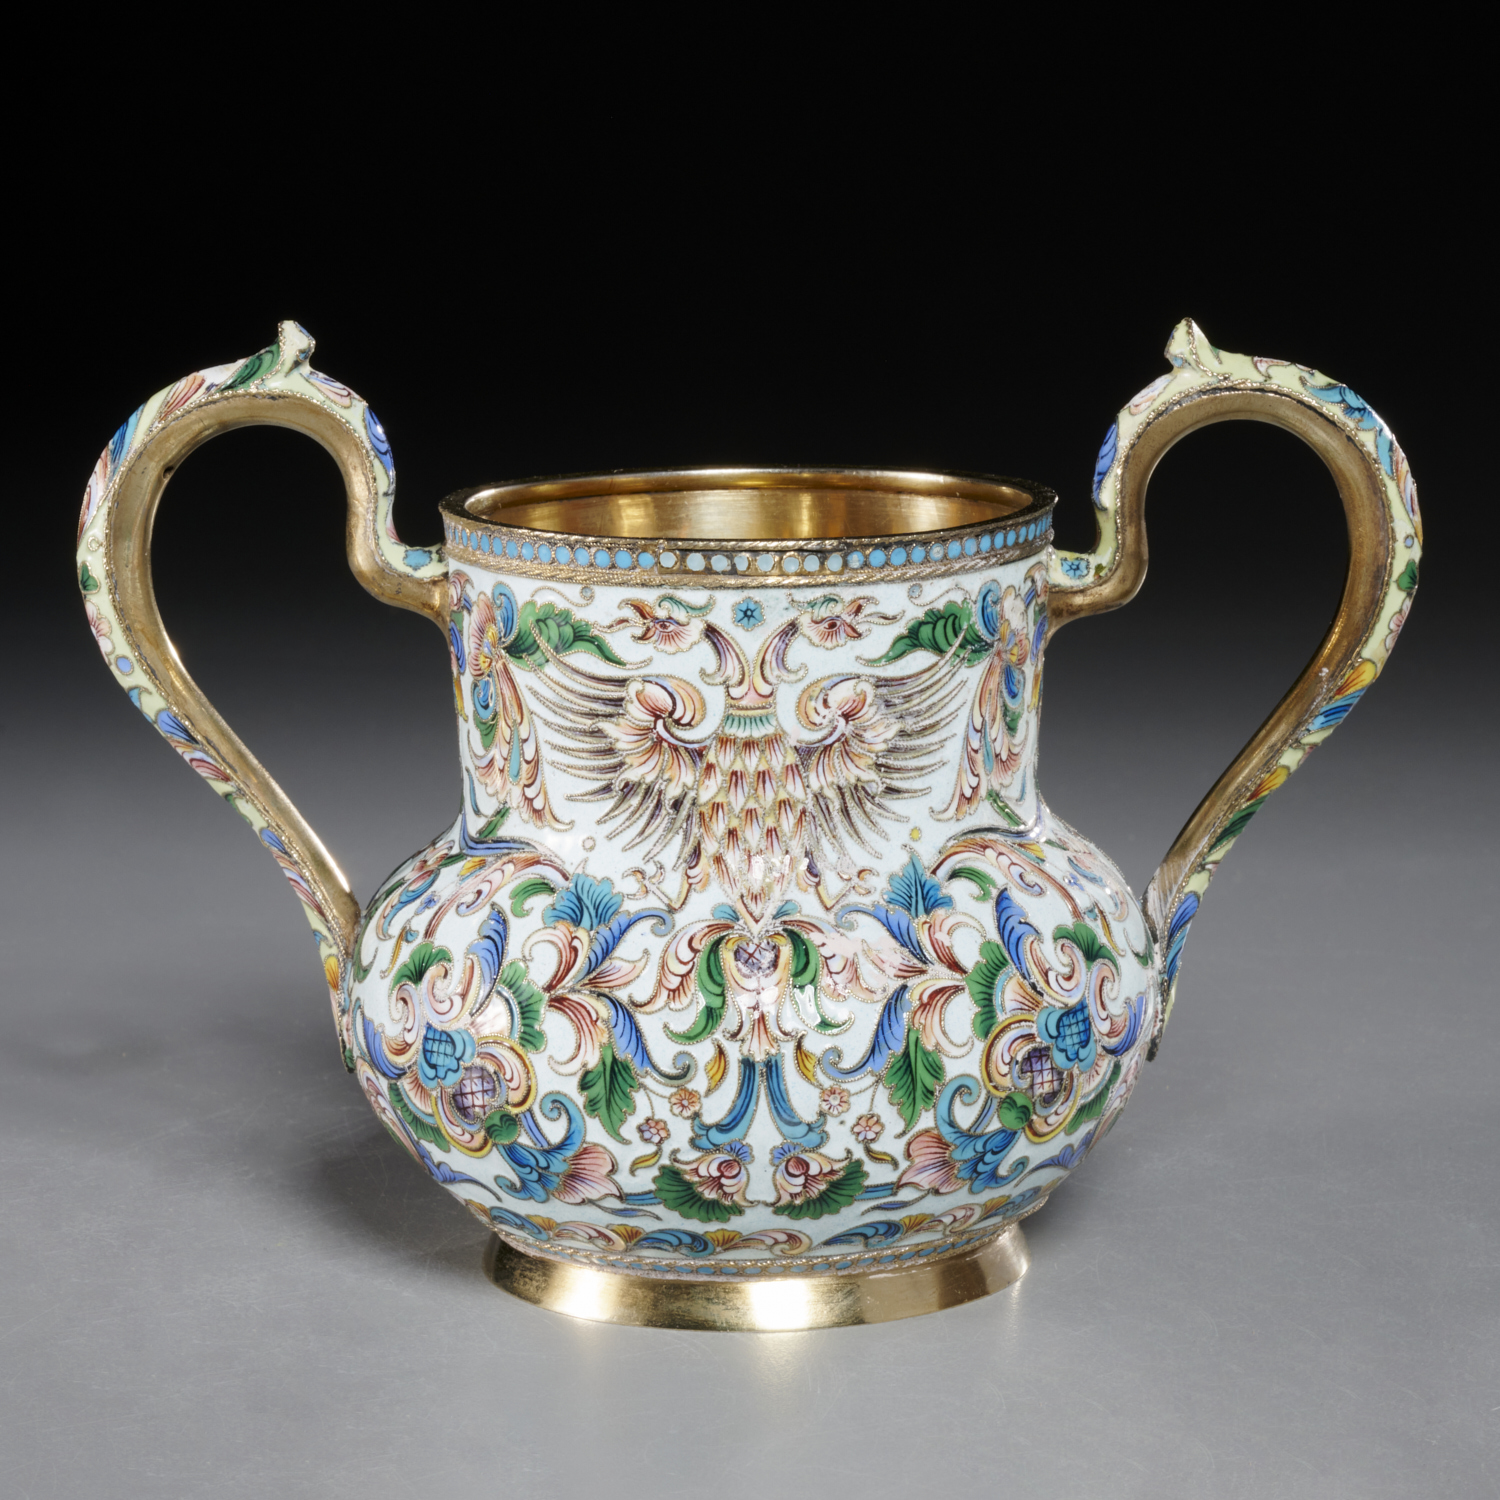 RUSSIAN SILVER AND SHADED ENAMEL HANDLED